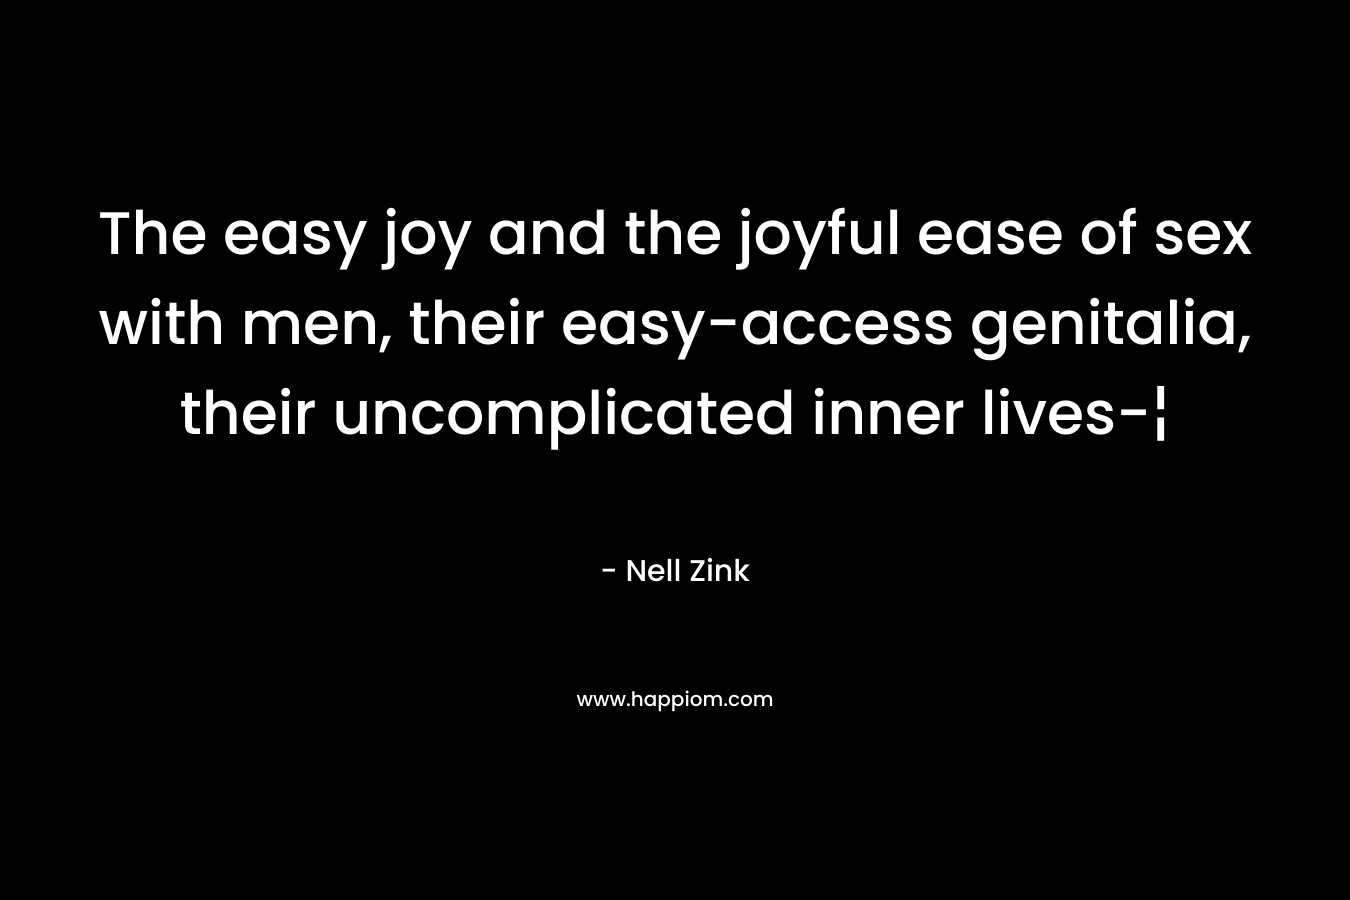 The easy joy and the joyful ease of sex with men, their easy-access genitalia, their uncomplicated inner lives-¦ – Nell Zink